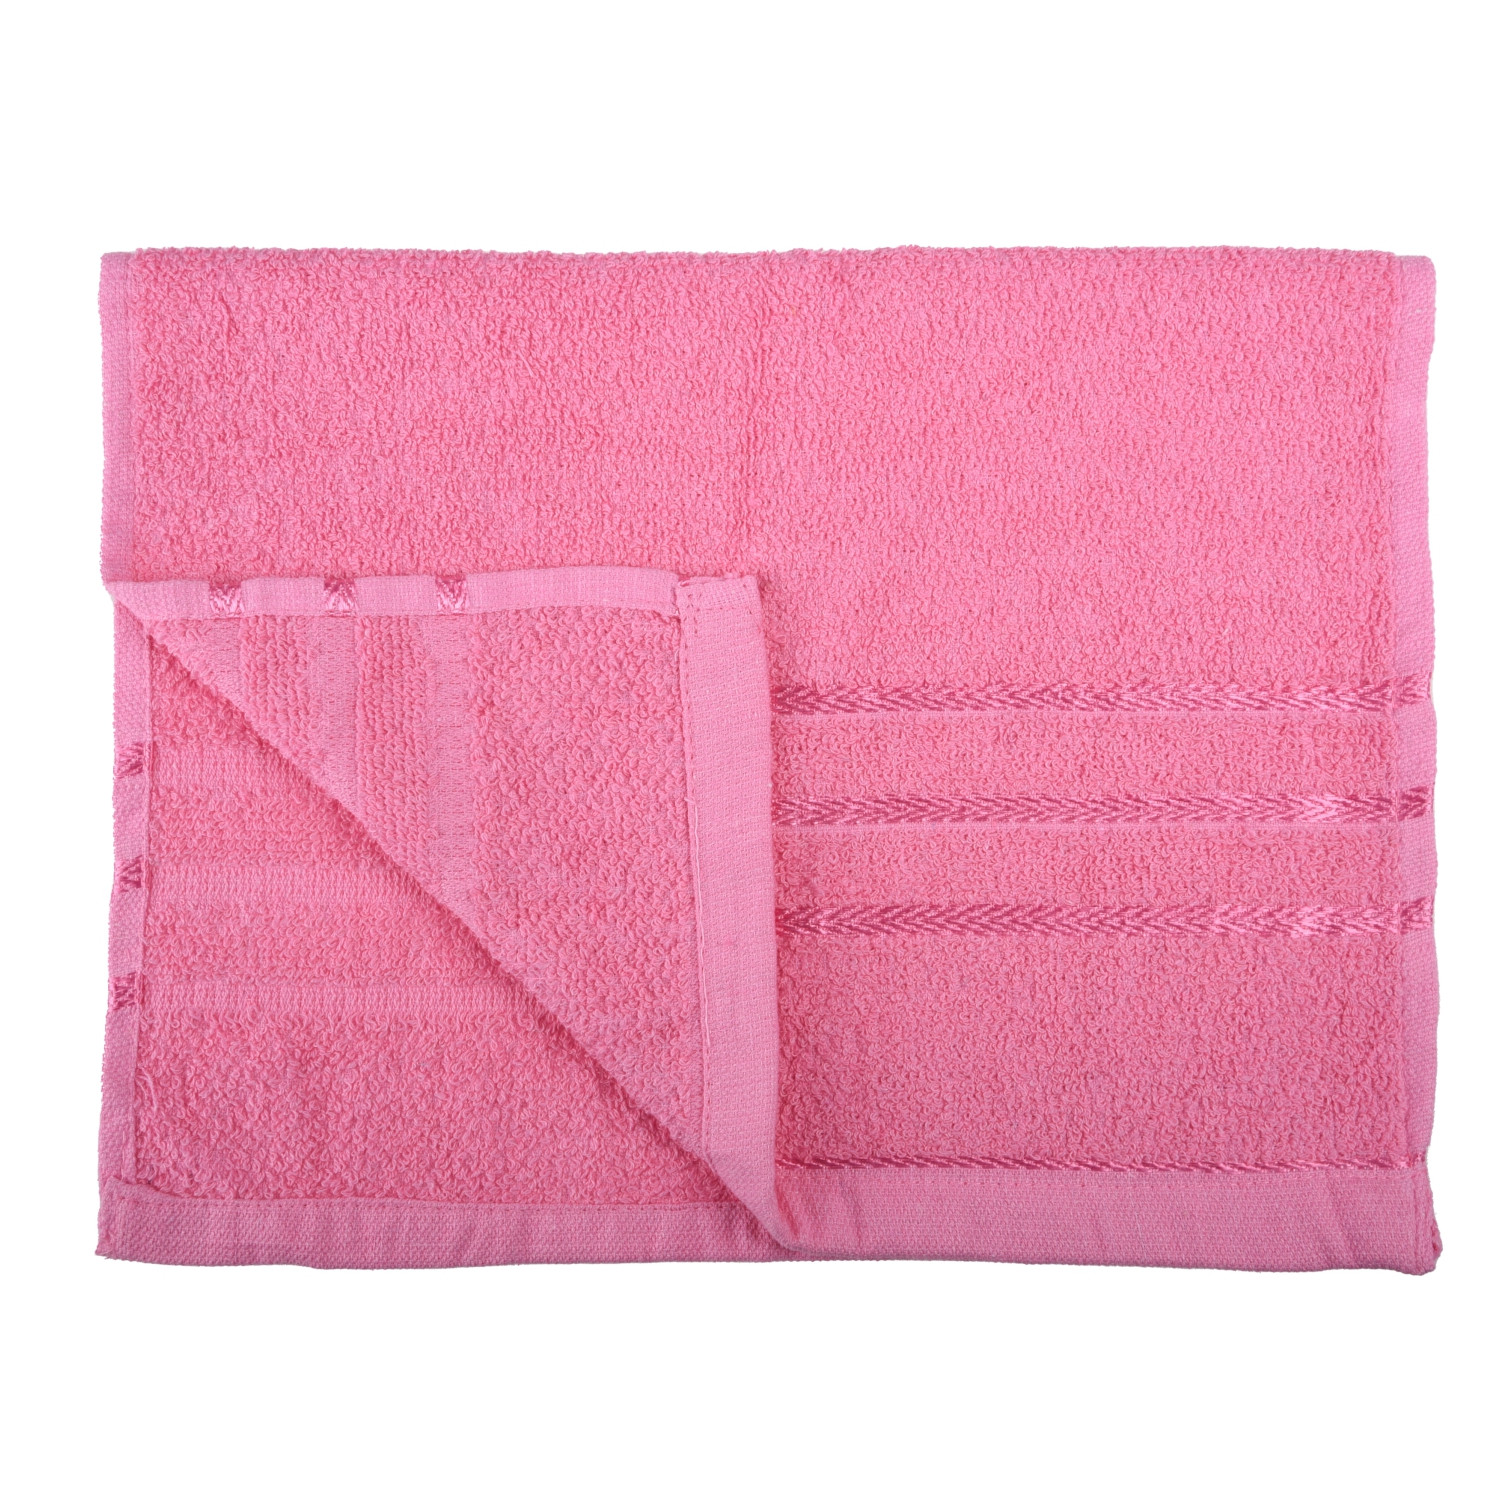 Kuber Industries Face Towel | Towels for Facewash | Towels for Gym | Facewash for Travel | Towels for Daily use | Workout Hand Towel | Lining Design | 14x21 Inch|Pink